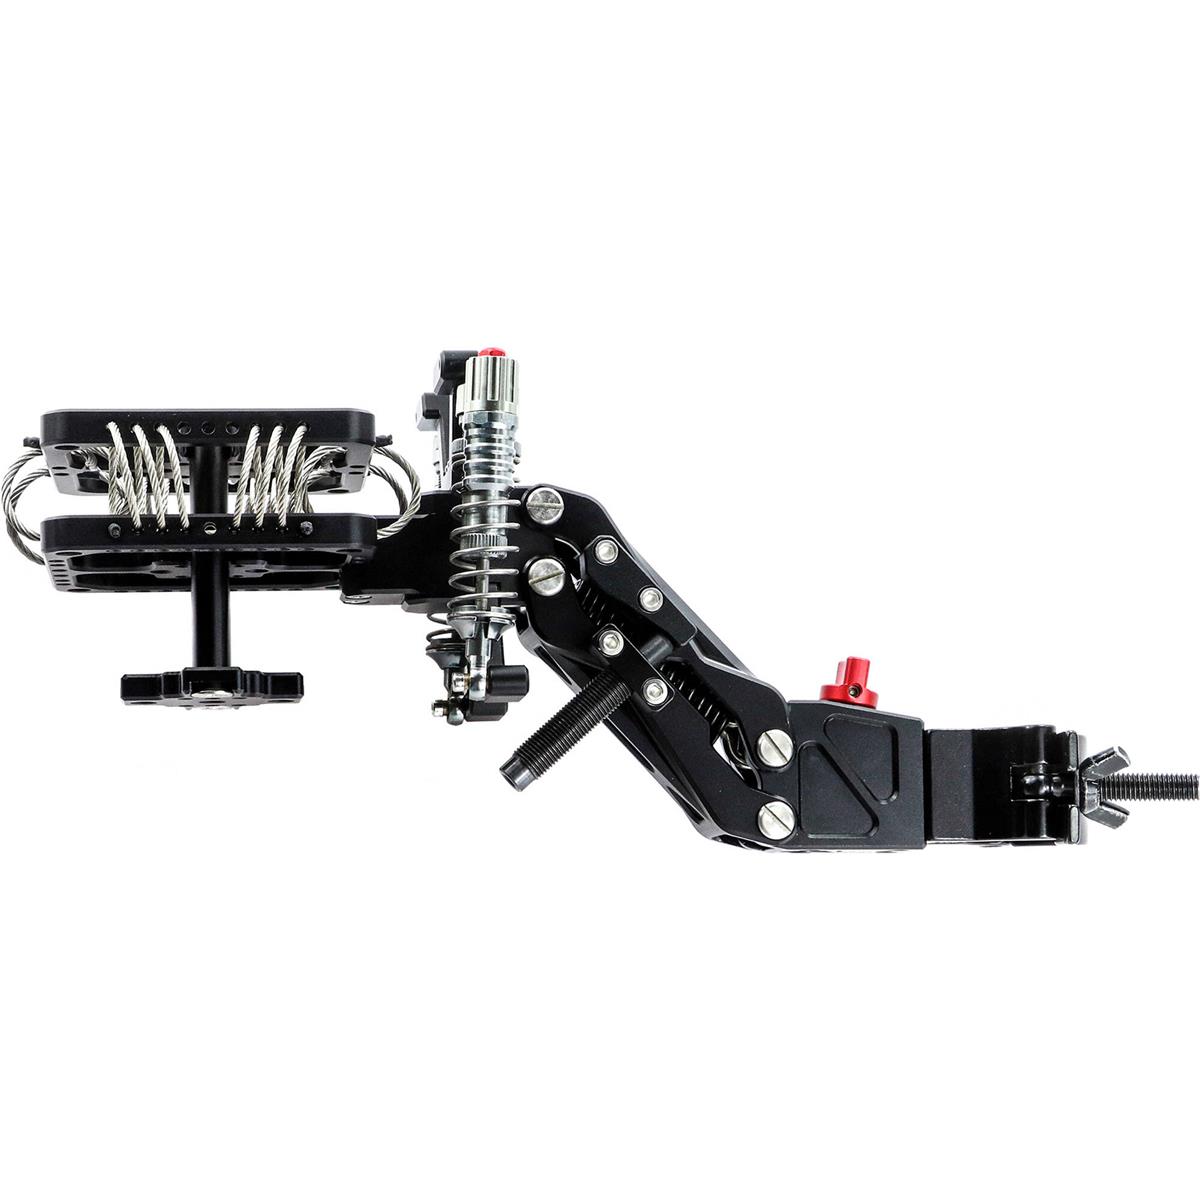 Image of Came-TV Camera Video Stabilizer Single Arm